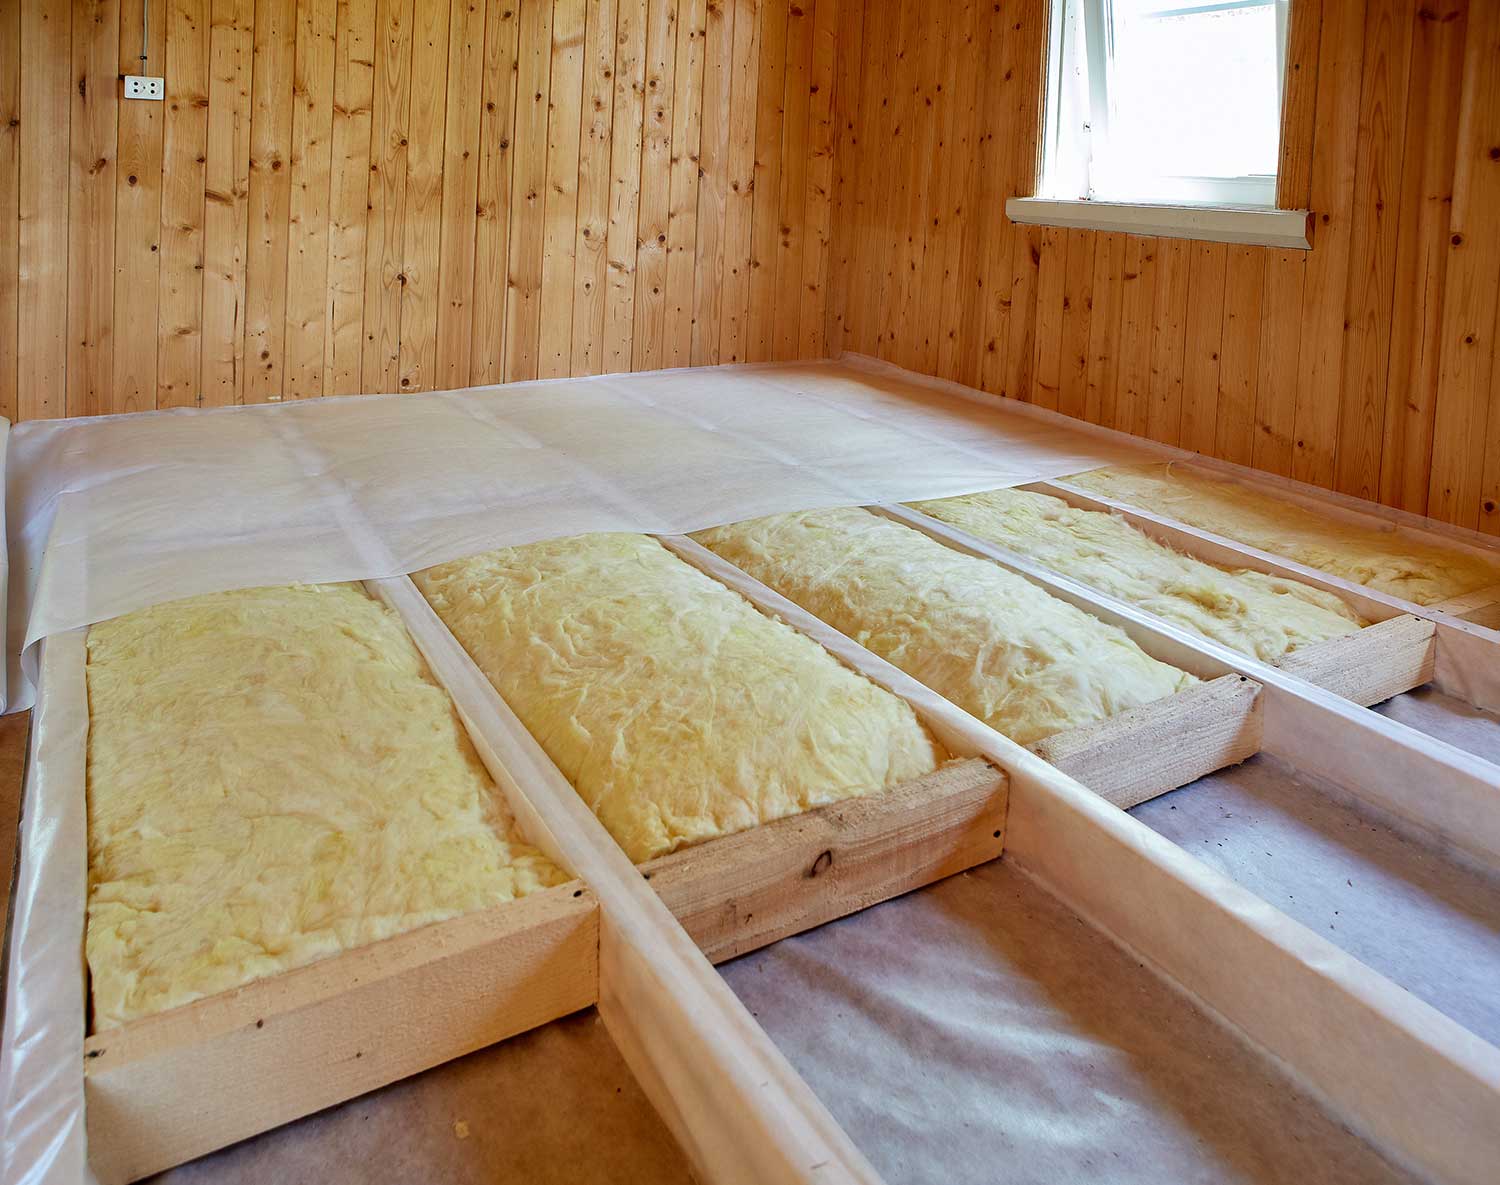 Covering insulation mineral wool with the use of hydro-vapor barrier material in the room of the country house